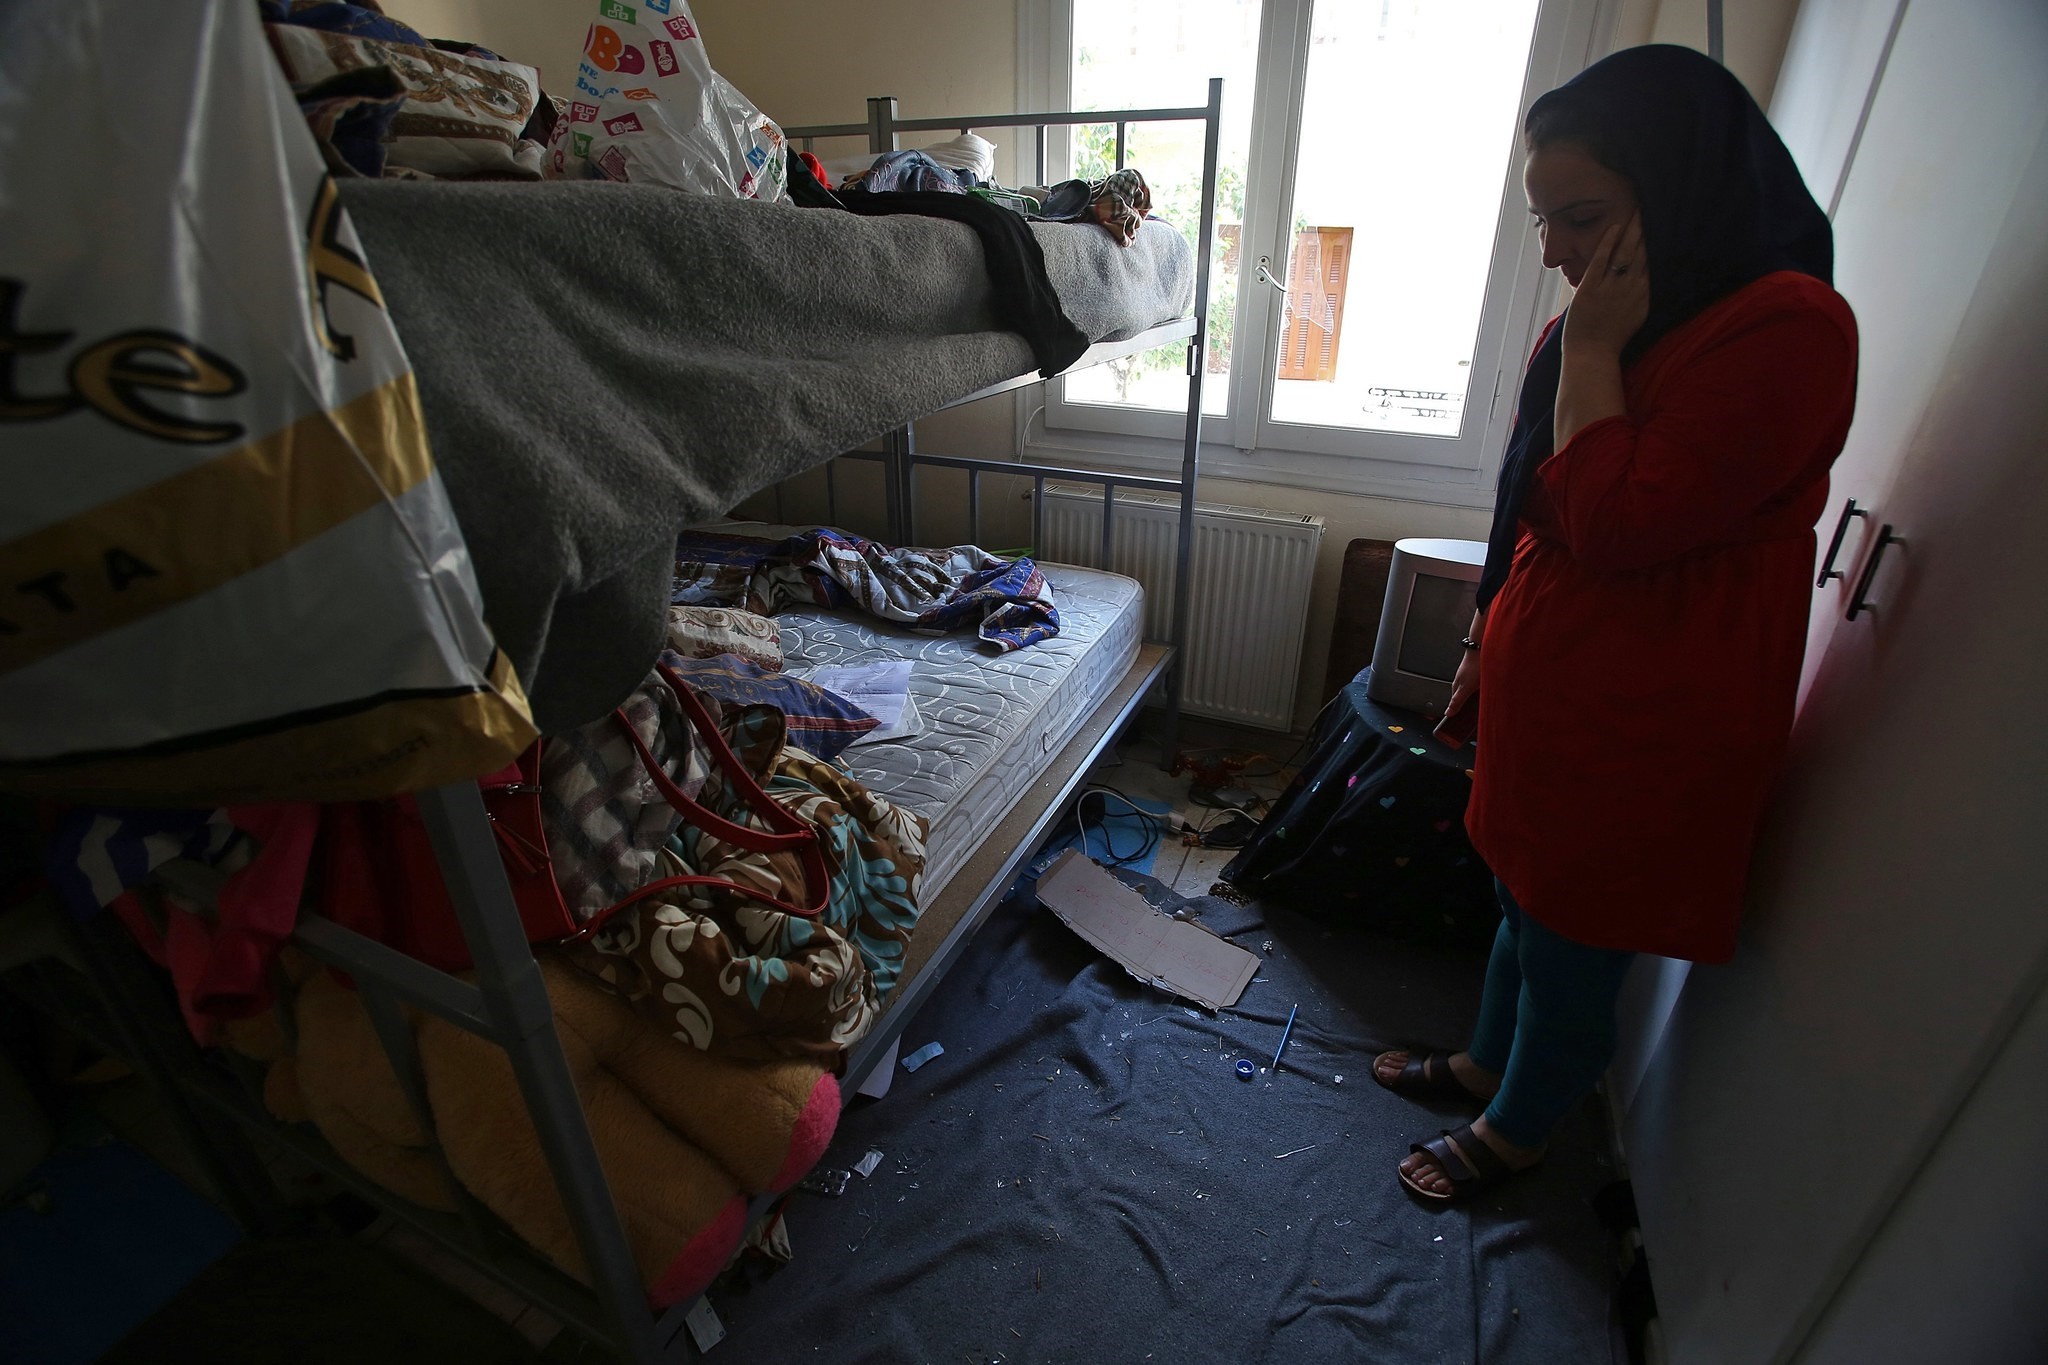 Mother of 11-years-old Afghan boy Amir stands inside her children's bedroom after an attack by unknown individuals in Athens, Greece, 03 November 2017. (EPA Photo)